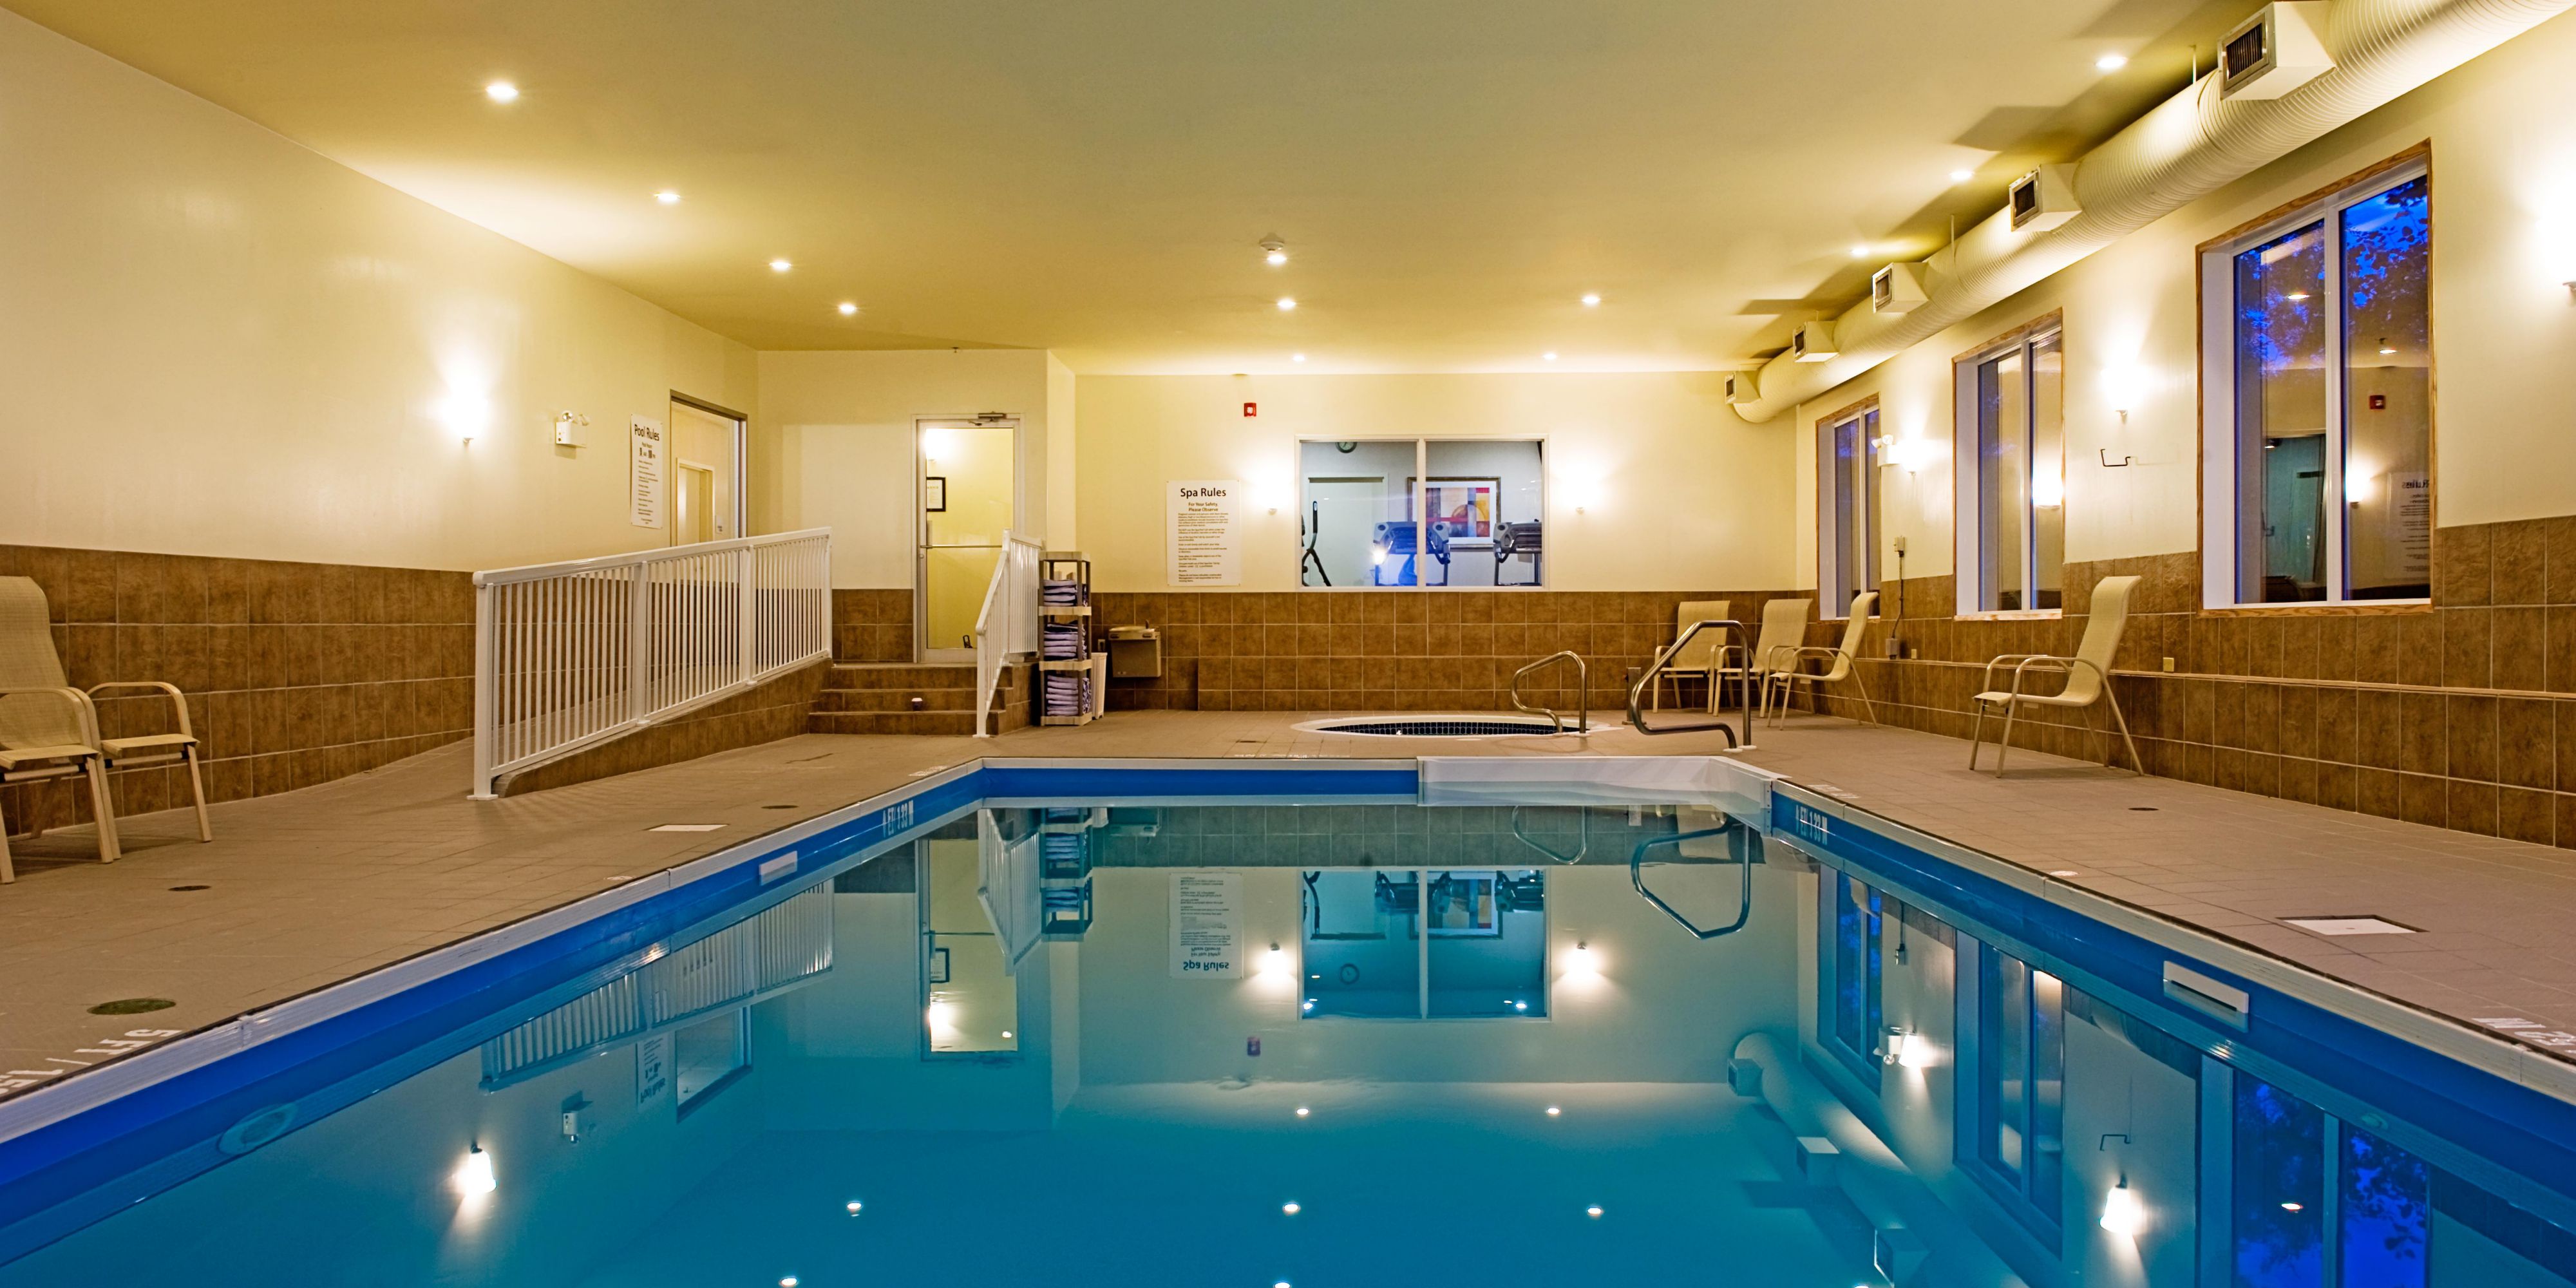 Enjoy and Relax in our indoor heated pool and Hot tub after a long day of work or weekend away from home with family open from 9:00 am to 9:00 pm.